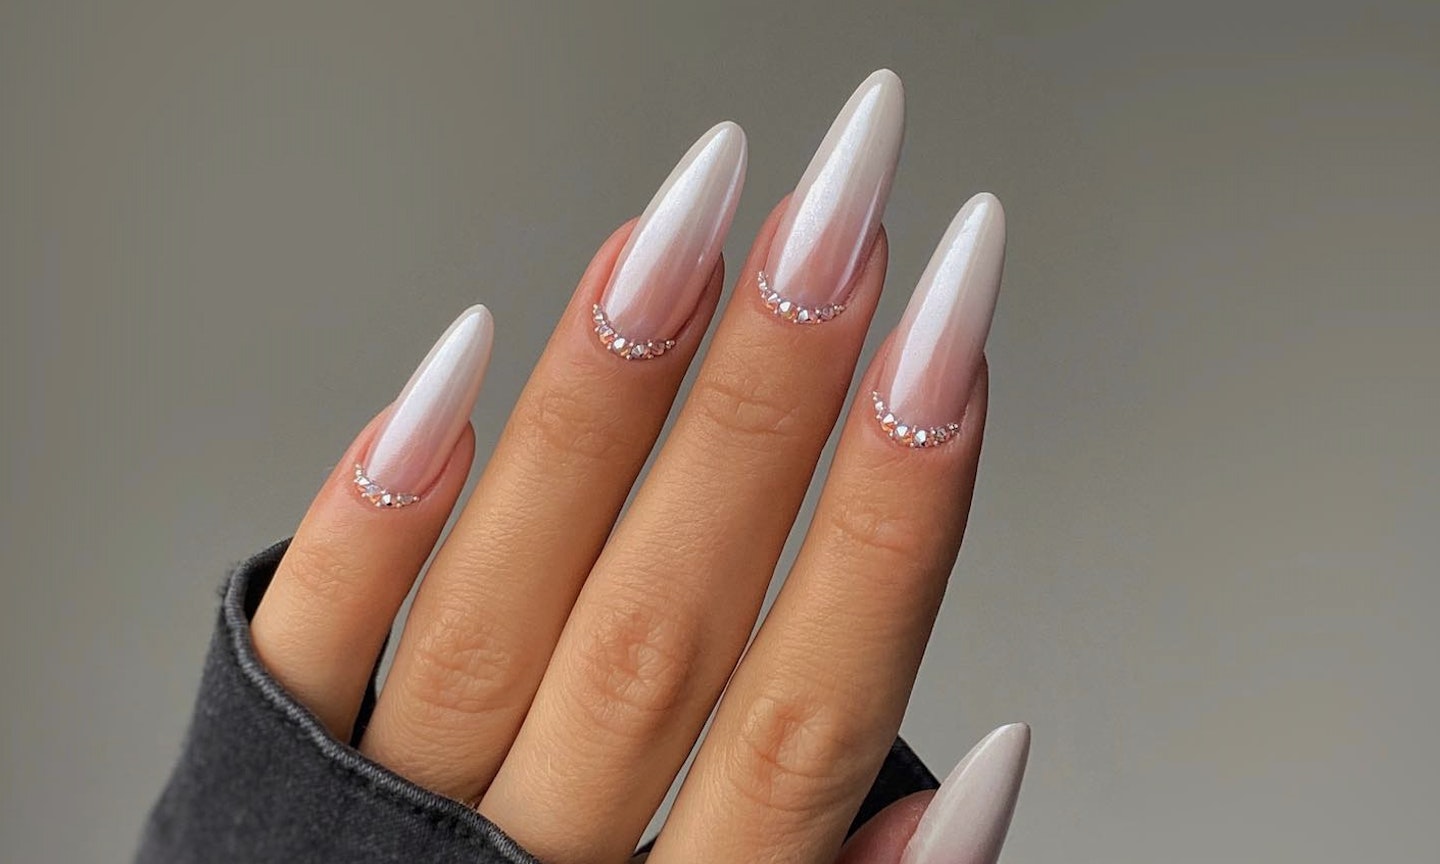 Simple gray, pink, and white nail art